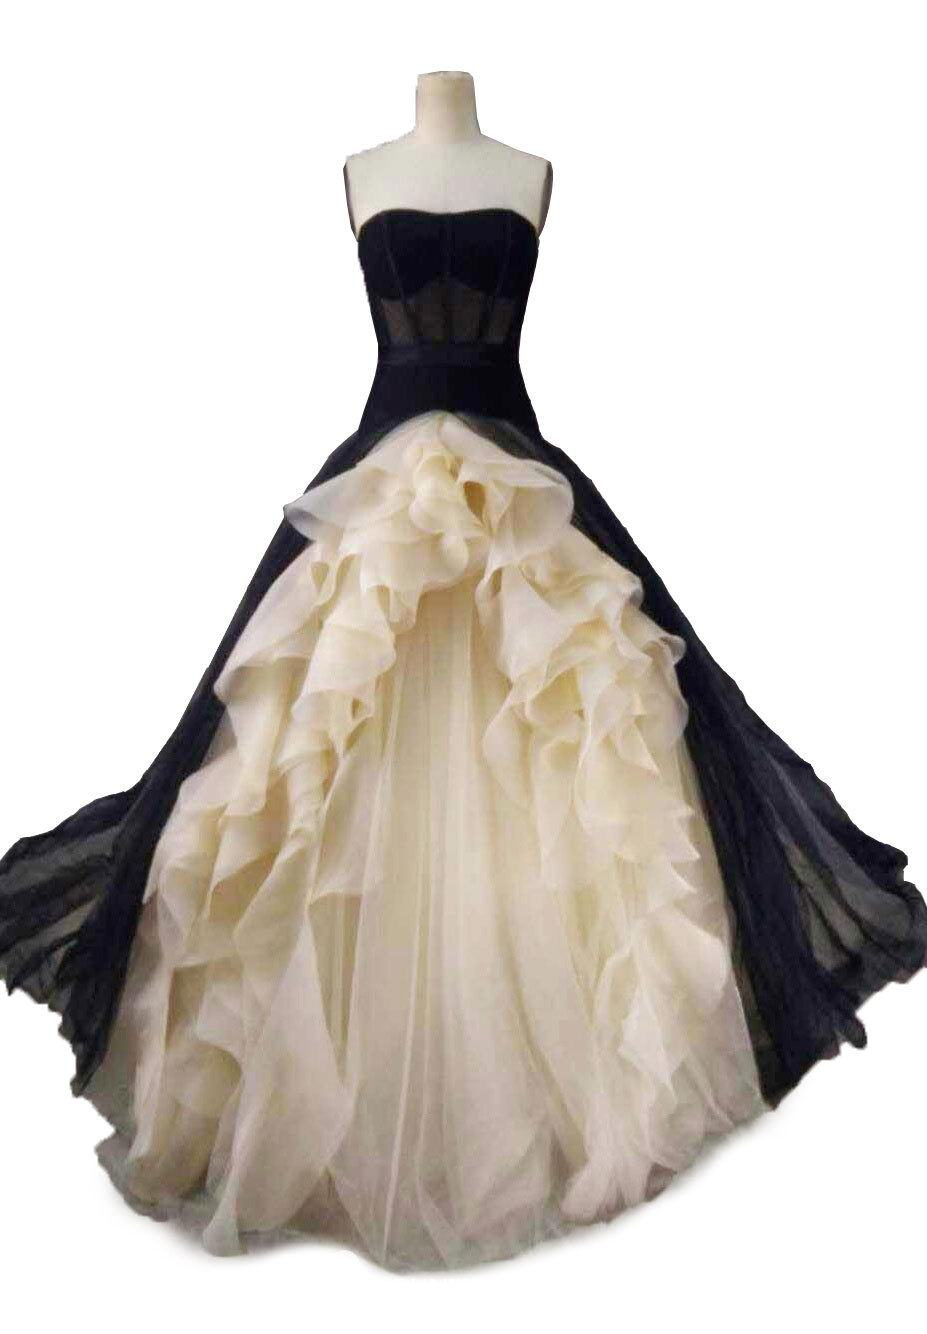 Rosyfancy Black And Ivory Strapless Bridal Wedding Gown With Organza Ruffles